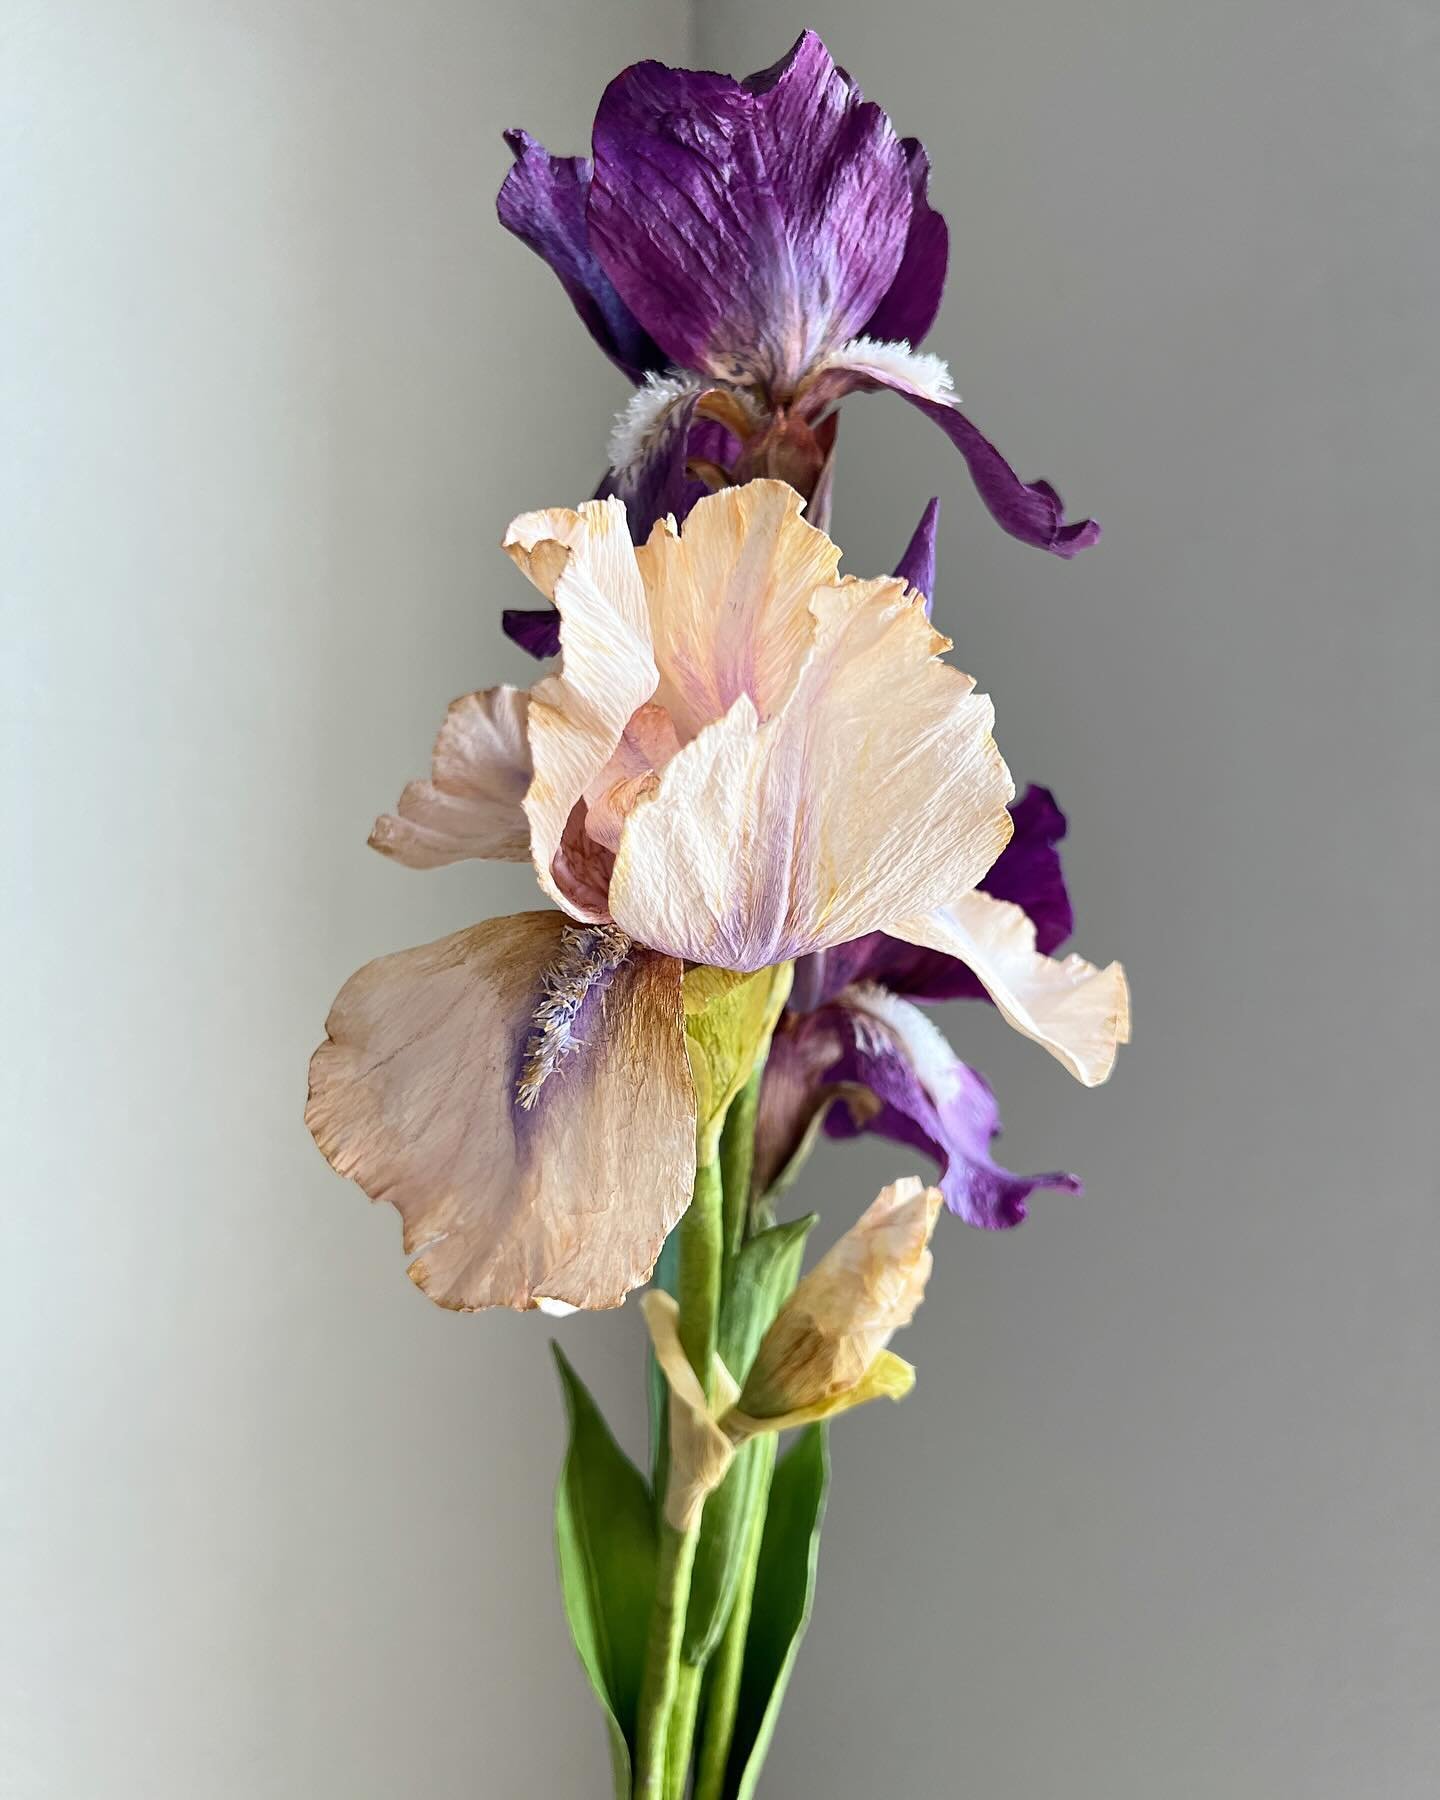 Paper bearded Irises: The story behind the commission.

My friend is a wonderful ceramic artist who is surrounded by other artists with whom she has formed friendships. Recently, the husband of one of her friends lost his battle with cancer. Because 